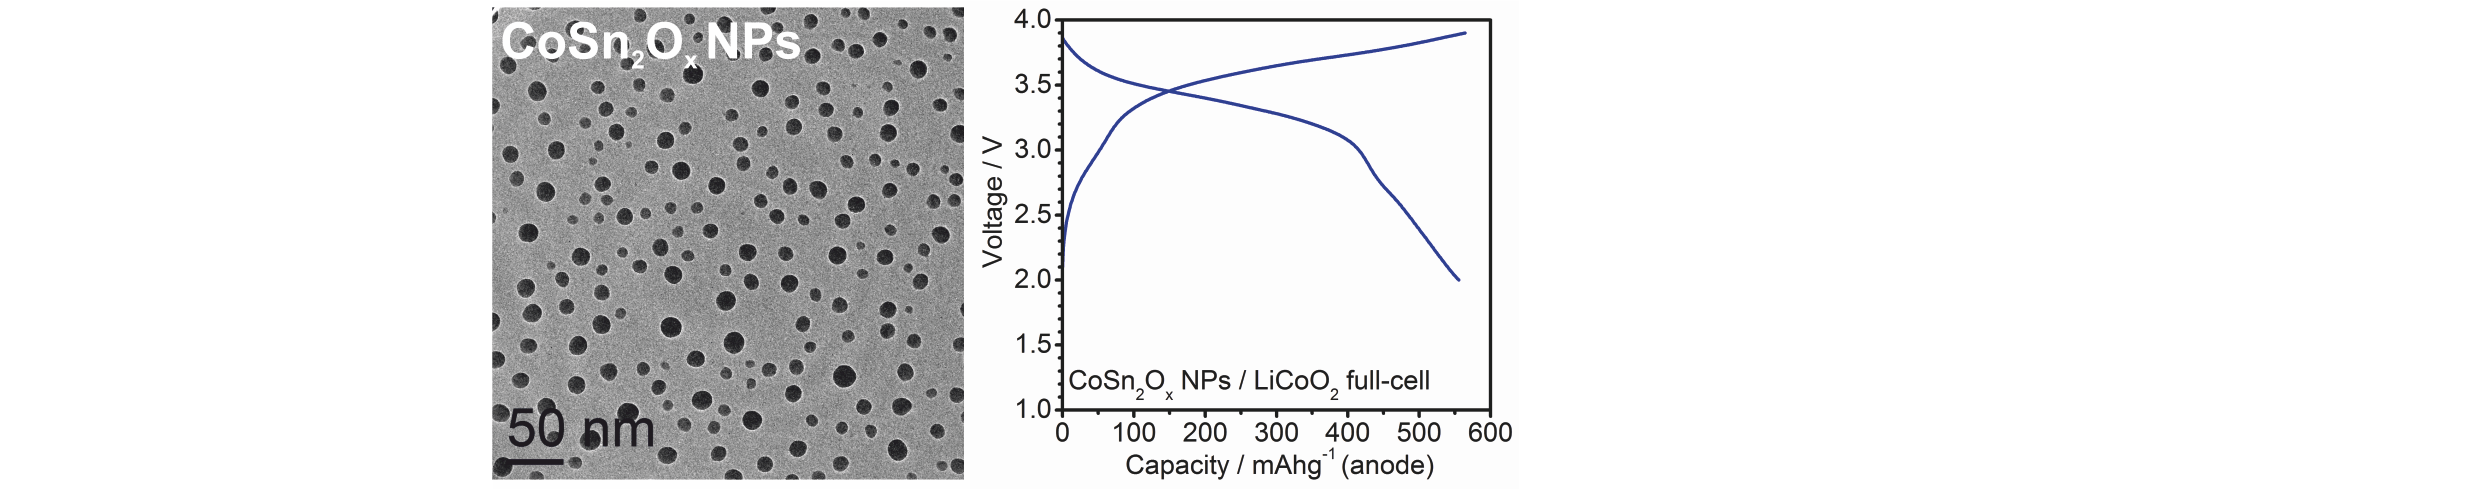 Oxidized Co-Sn Nanoparticles as Long-Lasting Anode Materials for Lithium-Ion Batteries